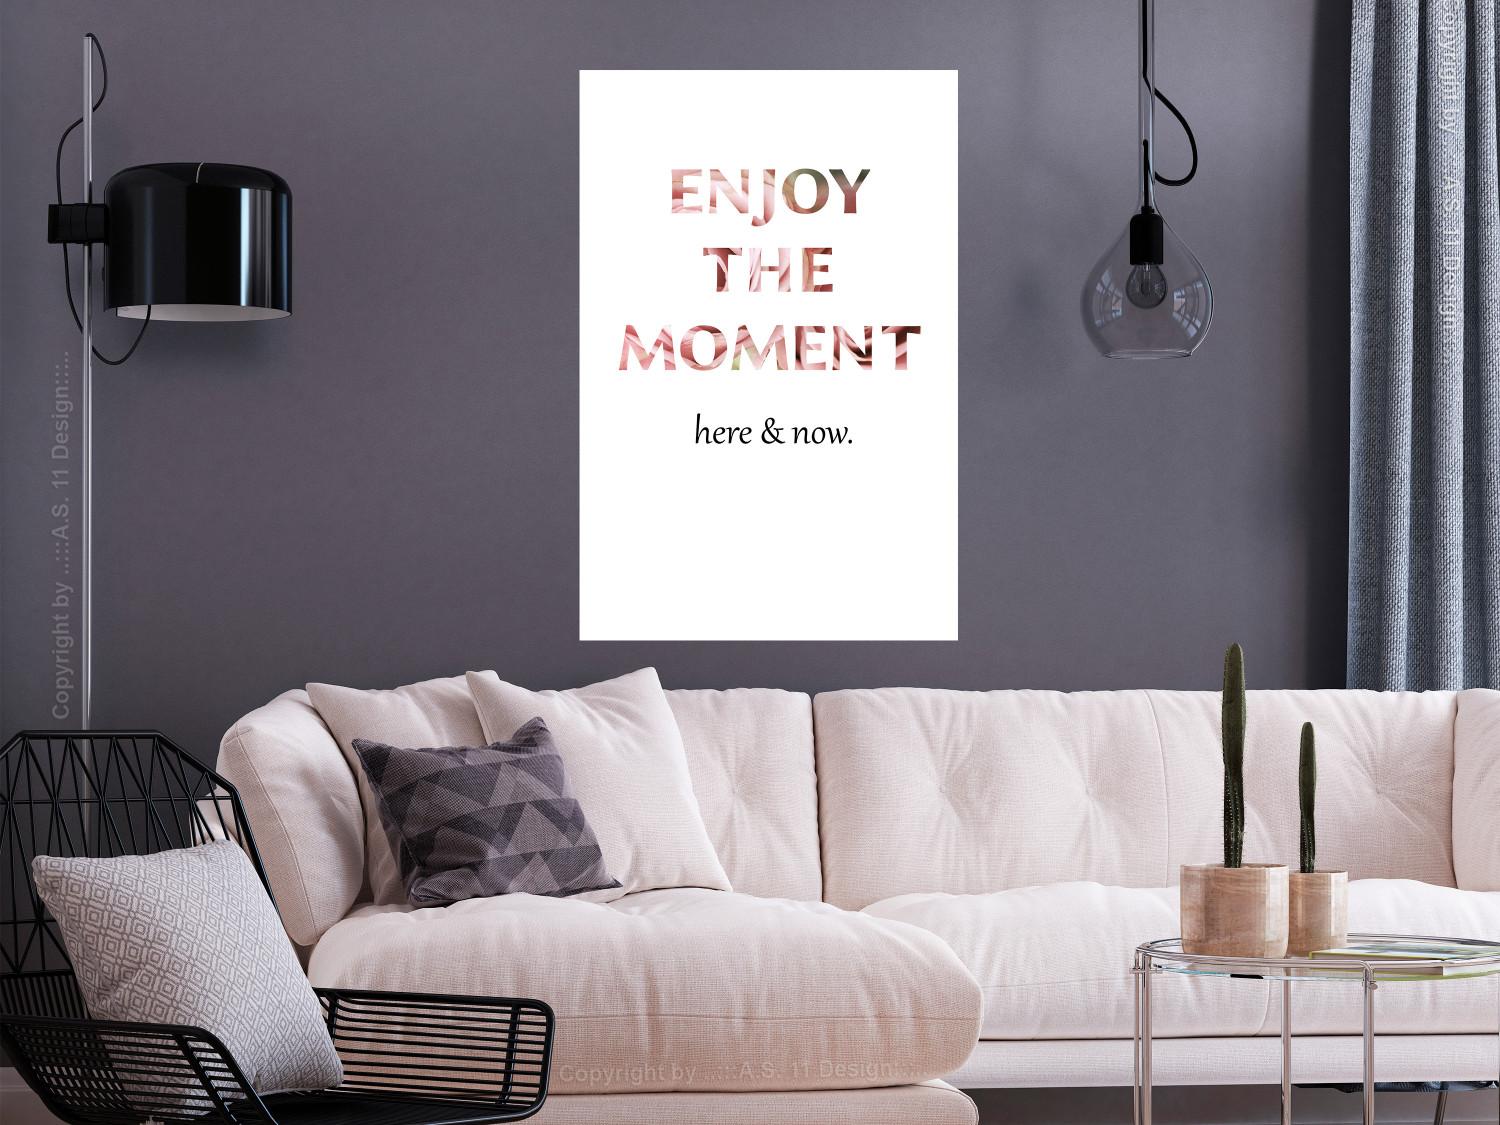 Poster Enjoy the Moment - English text with a pink motif on a white background